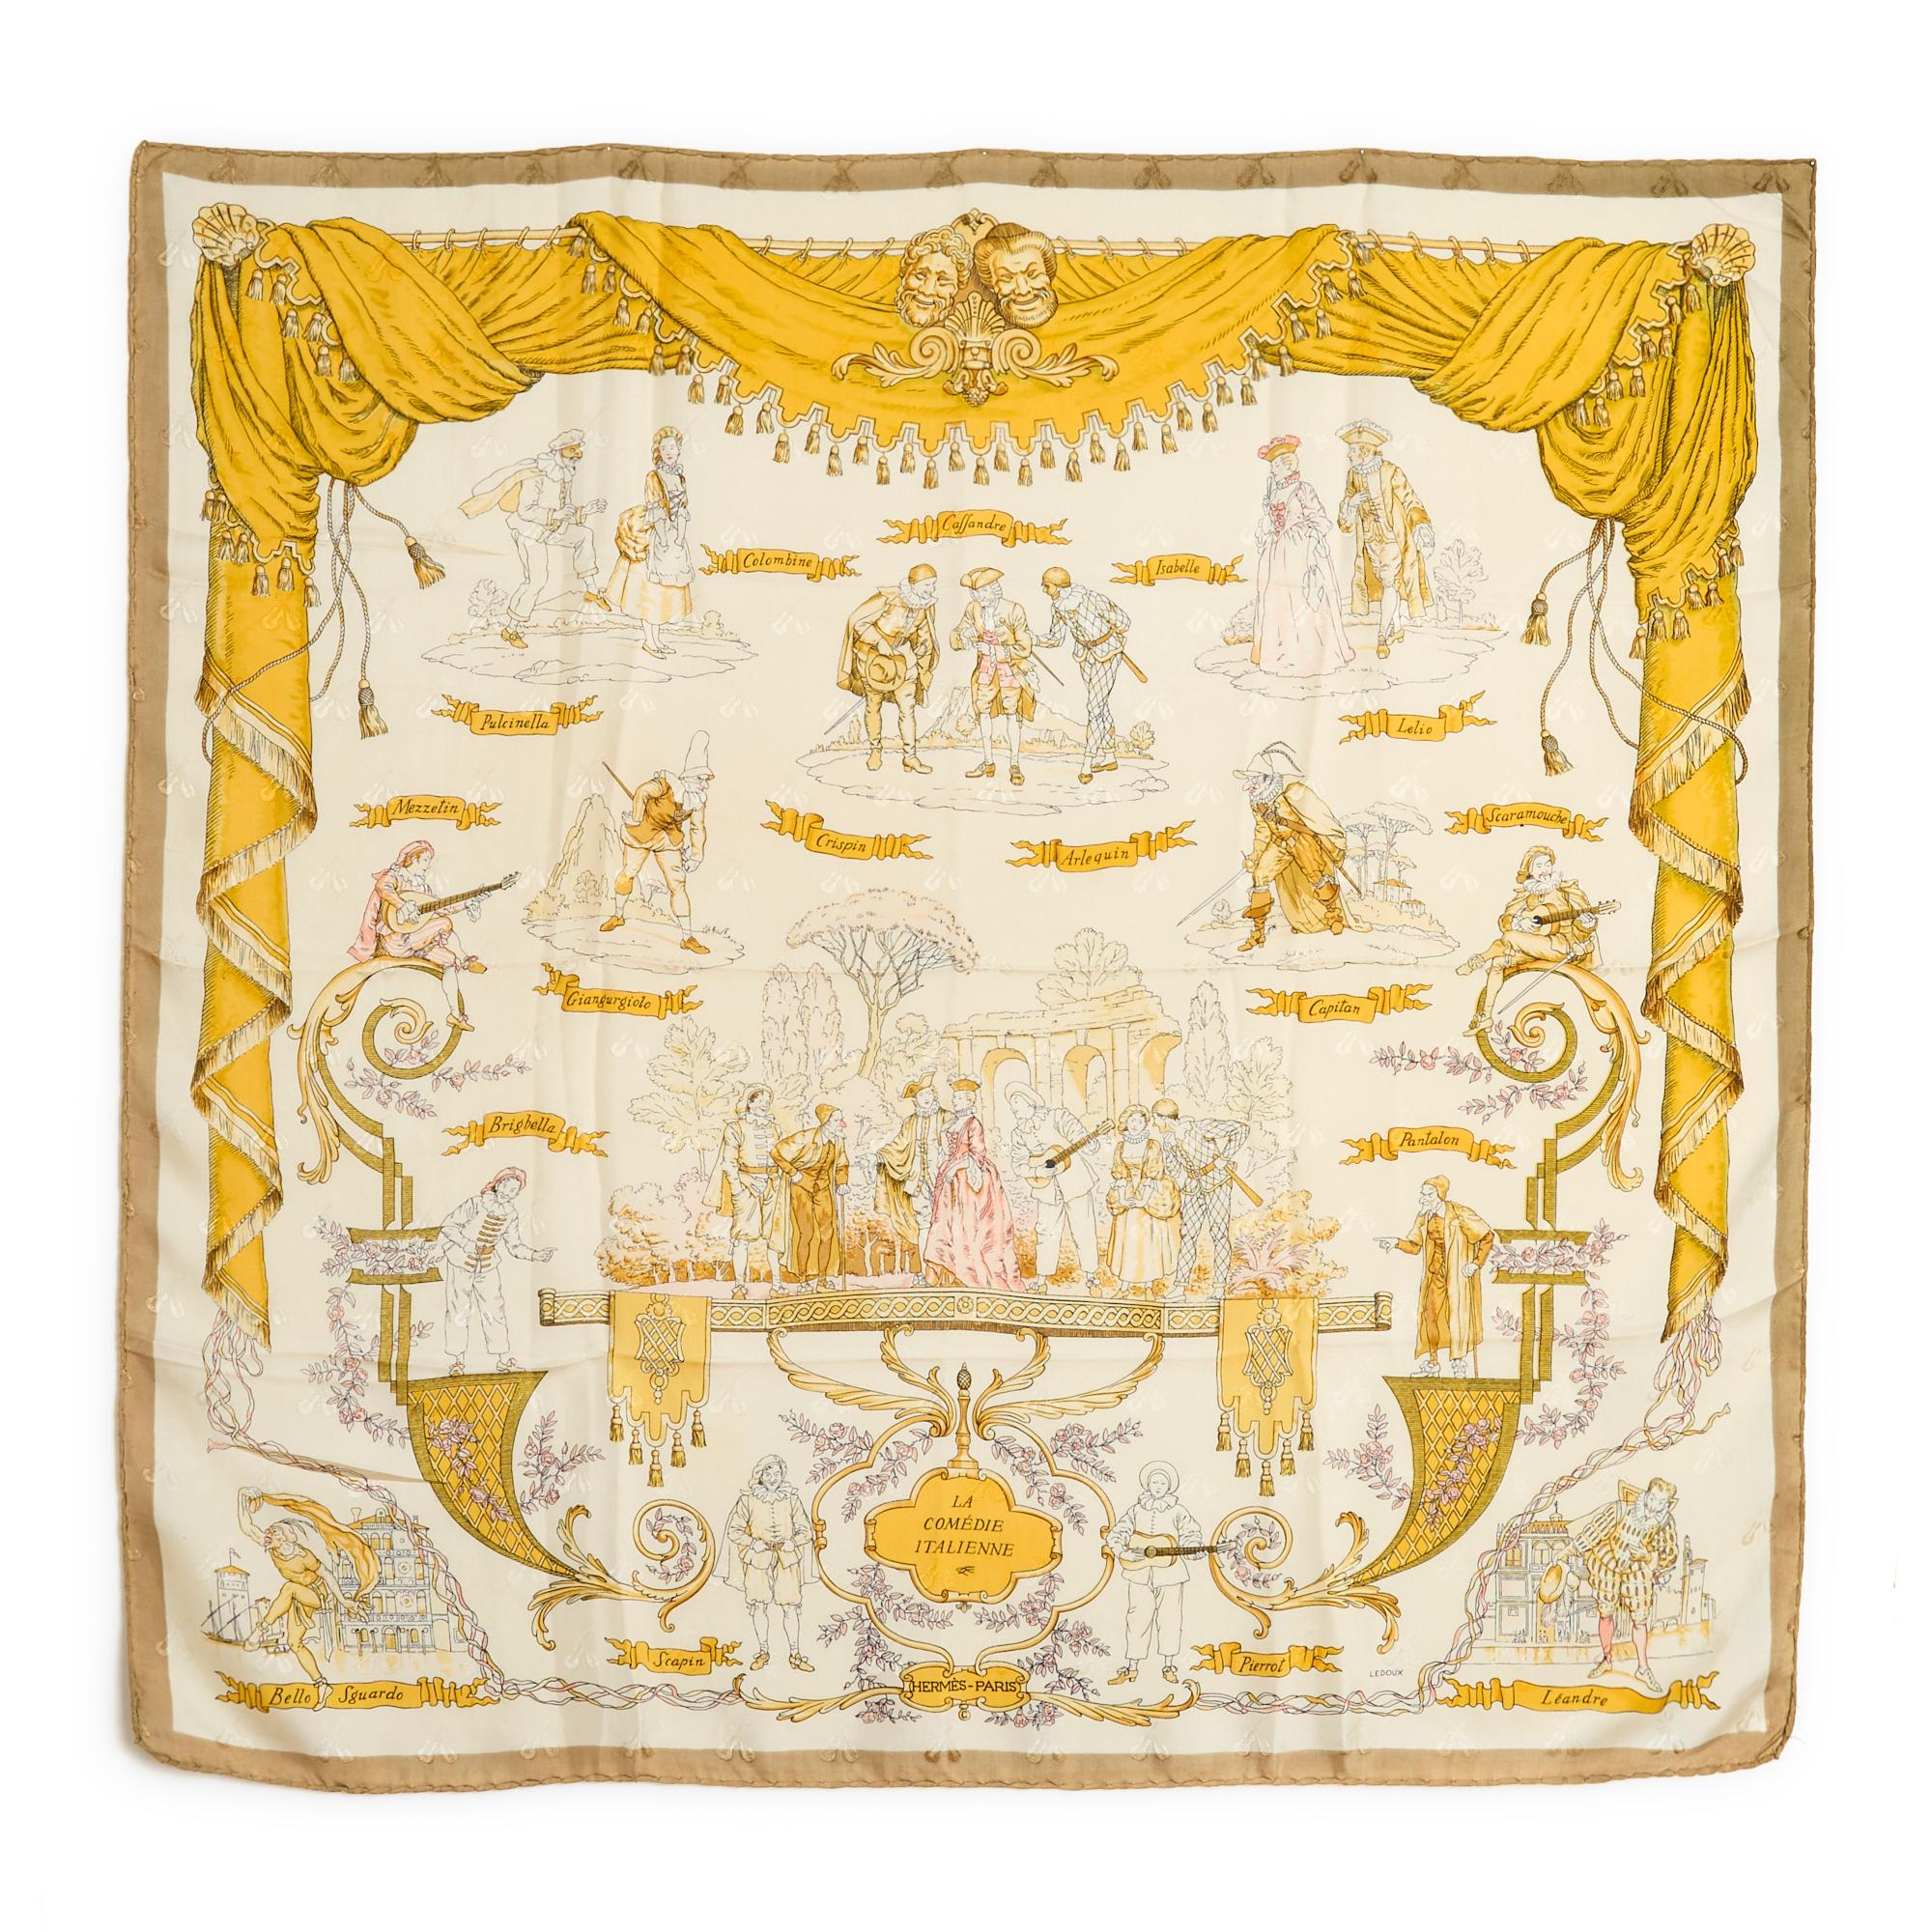 Hermès square 90 scarf in damask silk twill, La ComédieItalienne pattern by Philippe Ledoux published in 1962 and re-edited in 1993, golden yellow tones, ecru background, taupe edges, the damask weave revealing musical instruments. Width 90 cm x